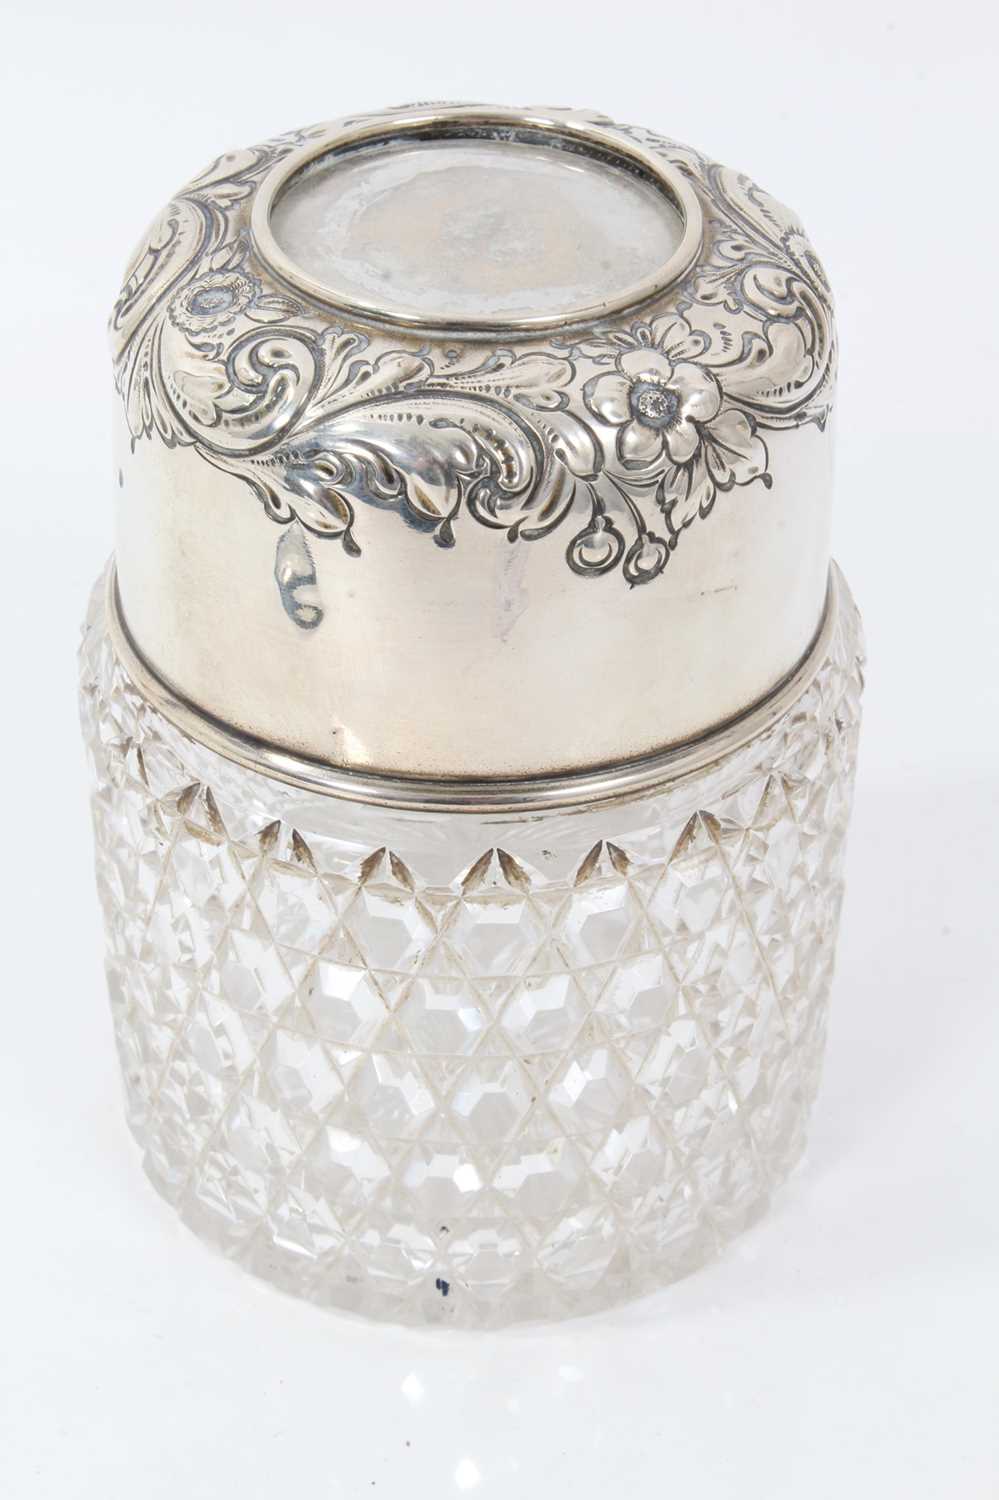 Large early 20th century American silver and cut glass scent bottle, removable top with embossed scr